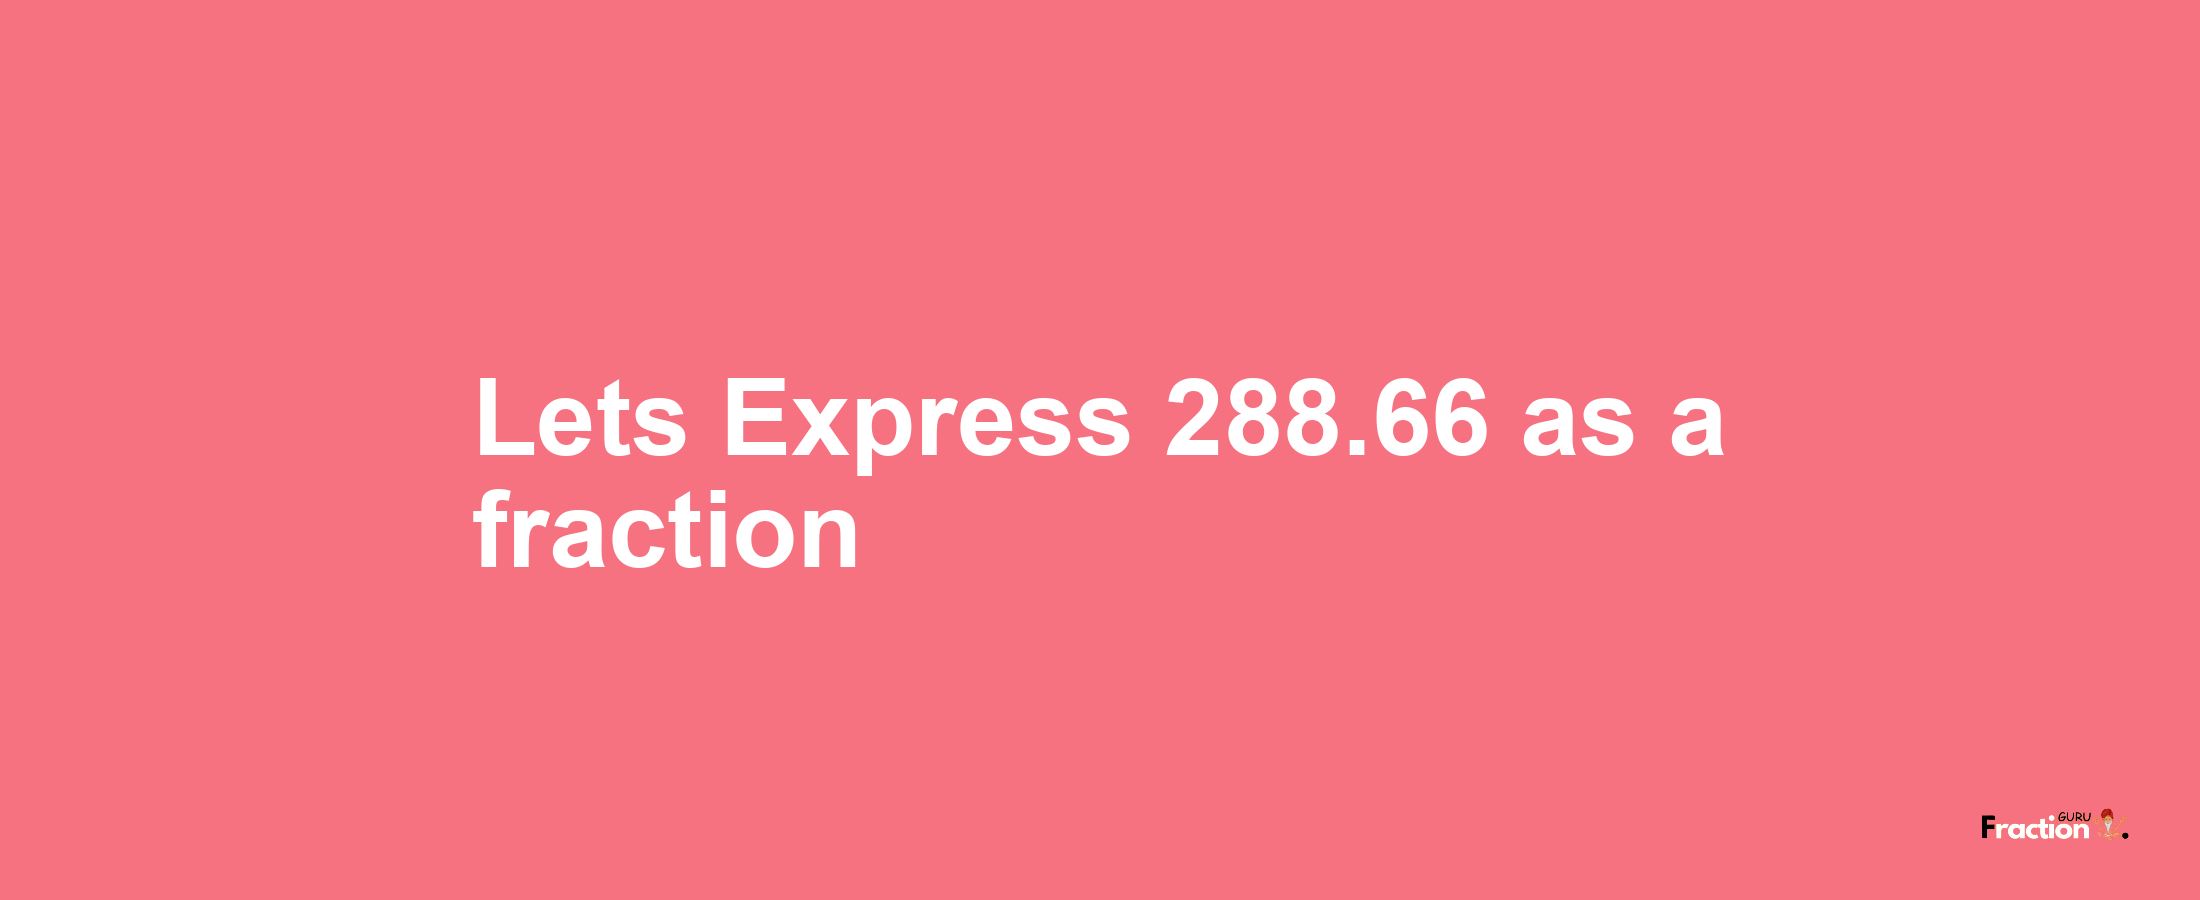 Lets Express 288.66 as afraction